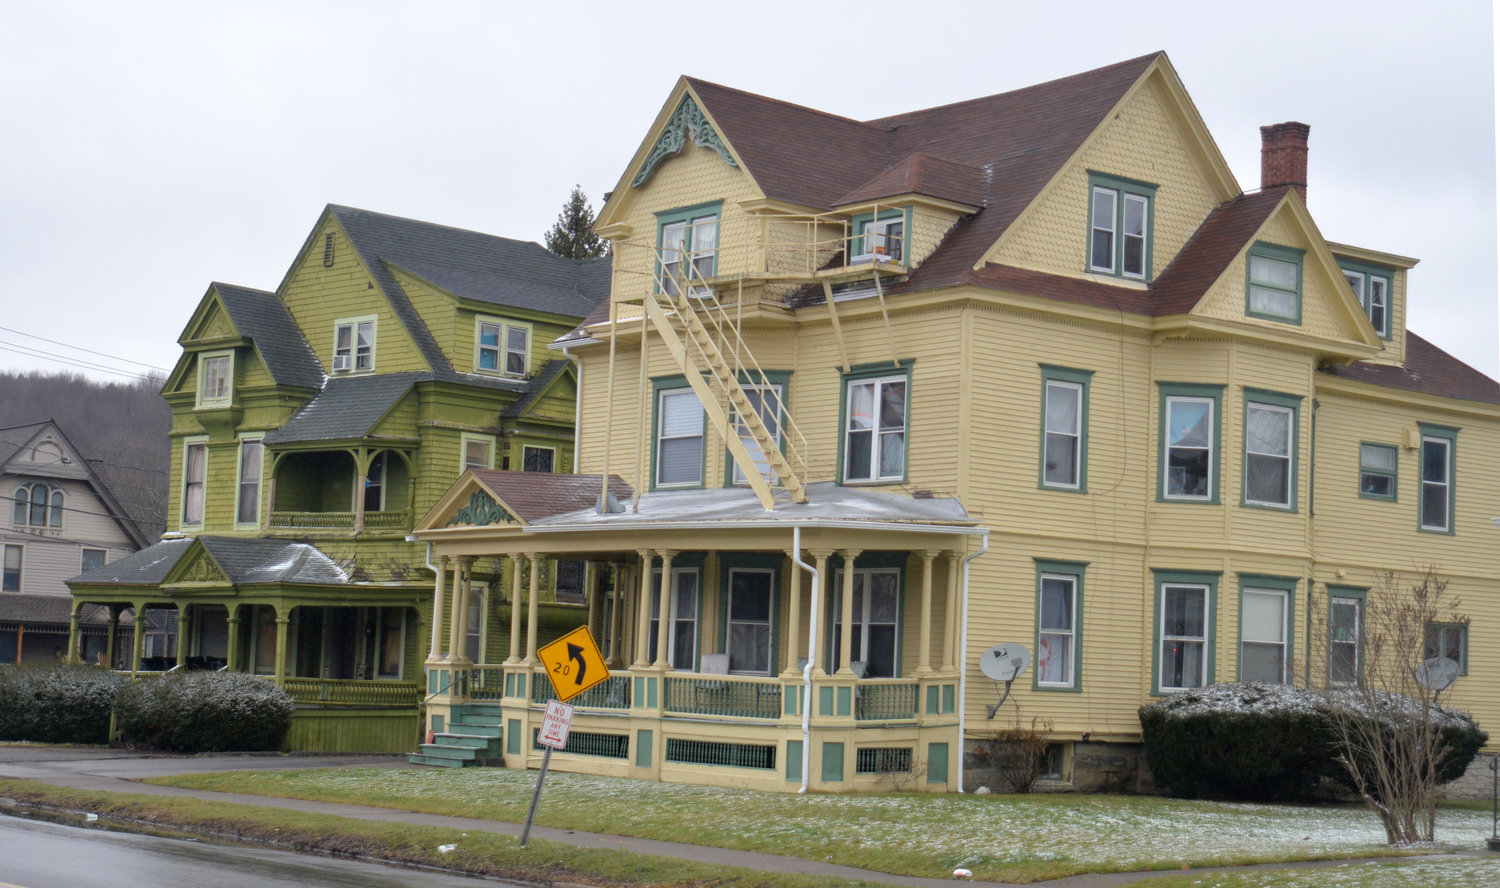 A line of Victorian-style houses on North Main Street in Cortland, Friday. Many Cortland houses built in this style were built in the late 19th century, making them more than a century old, and less environmentally friendly.